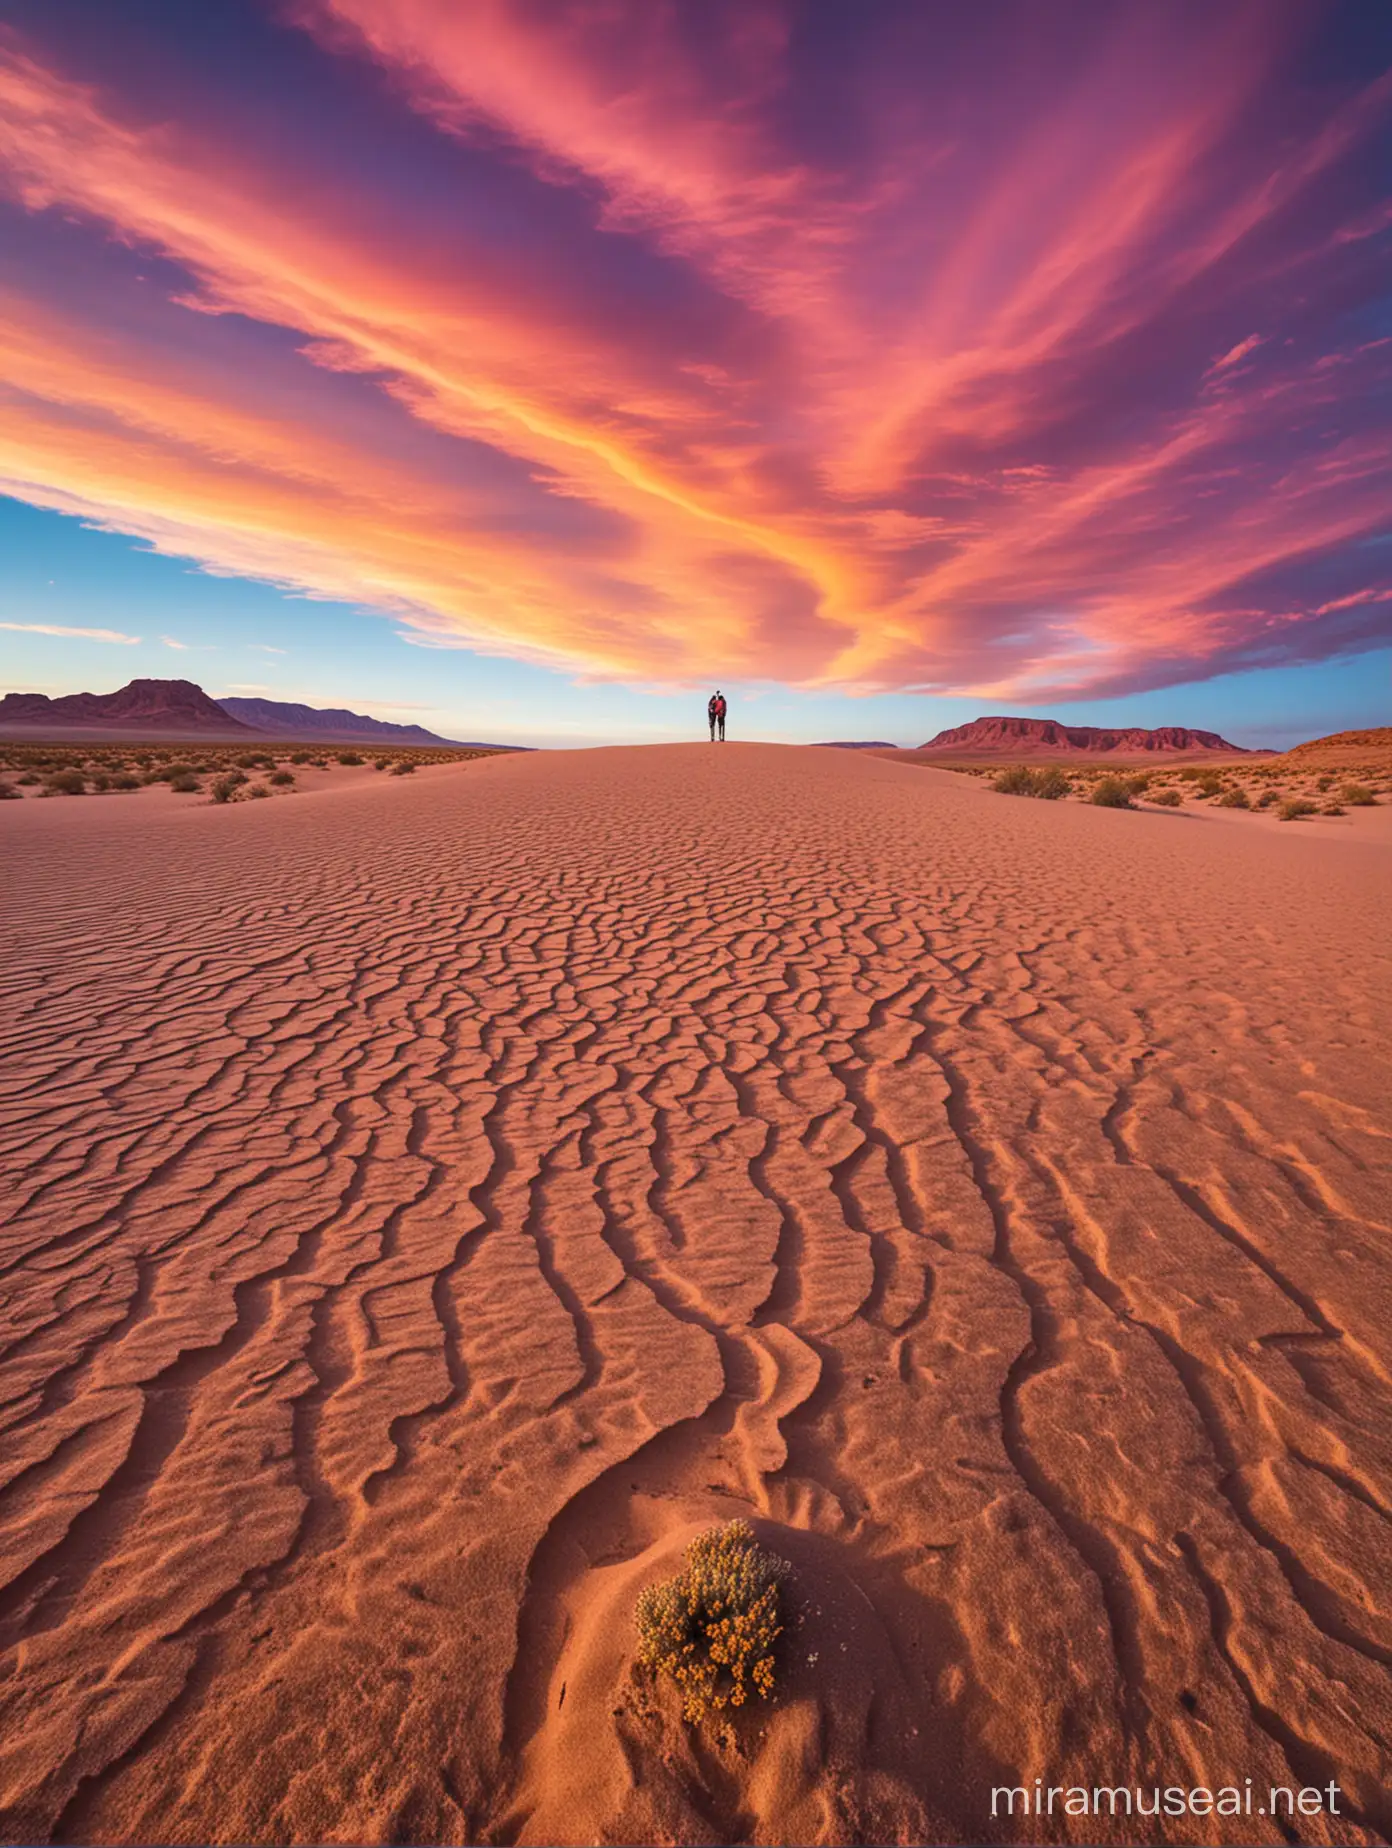 Desert Wanderers Amidst a Vivid Colorful Sky